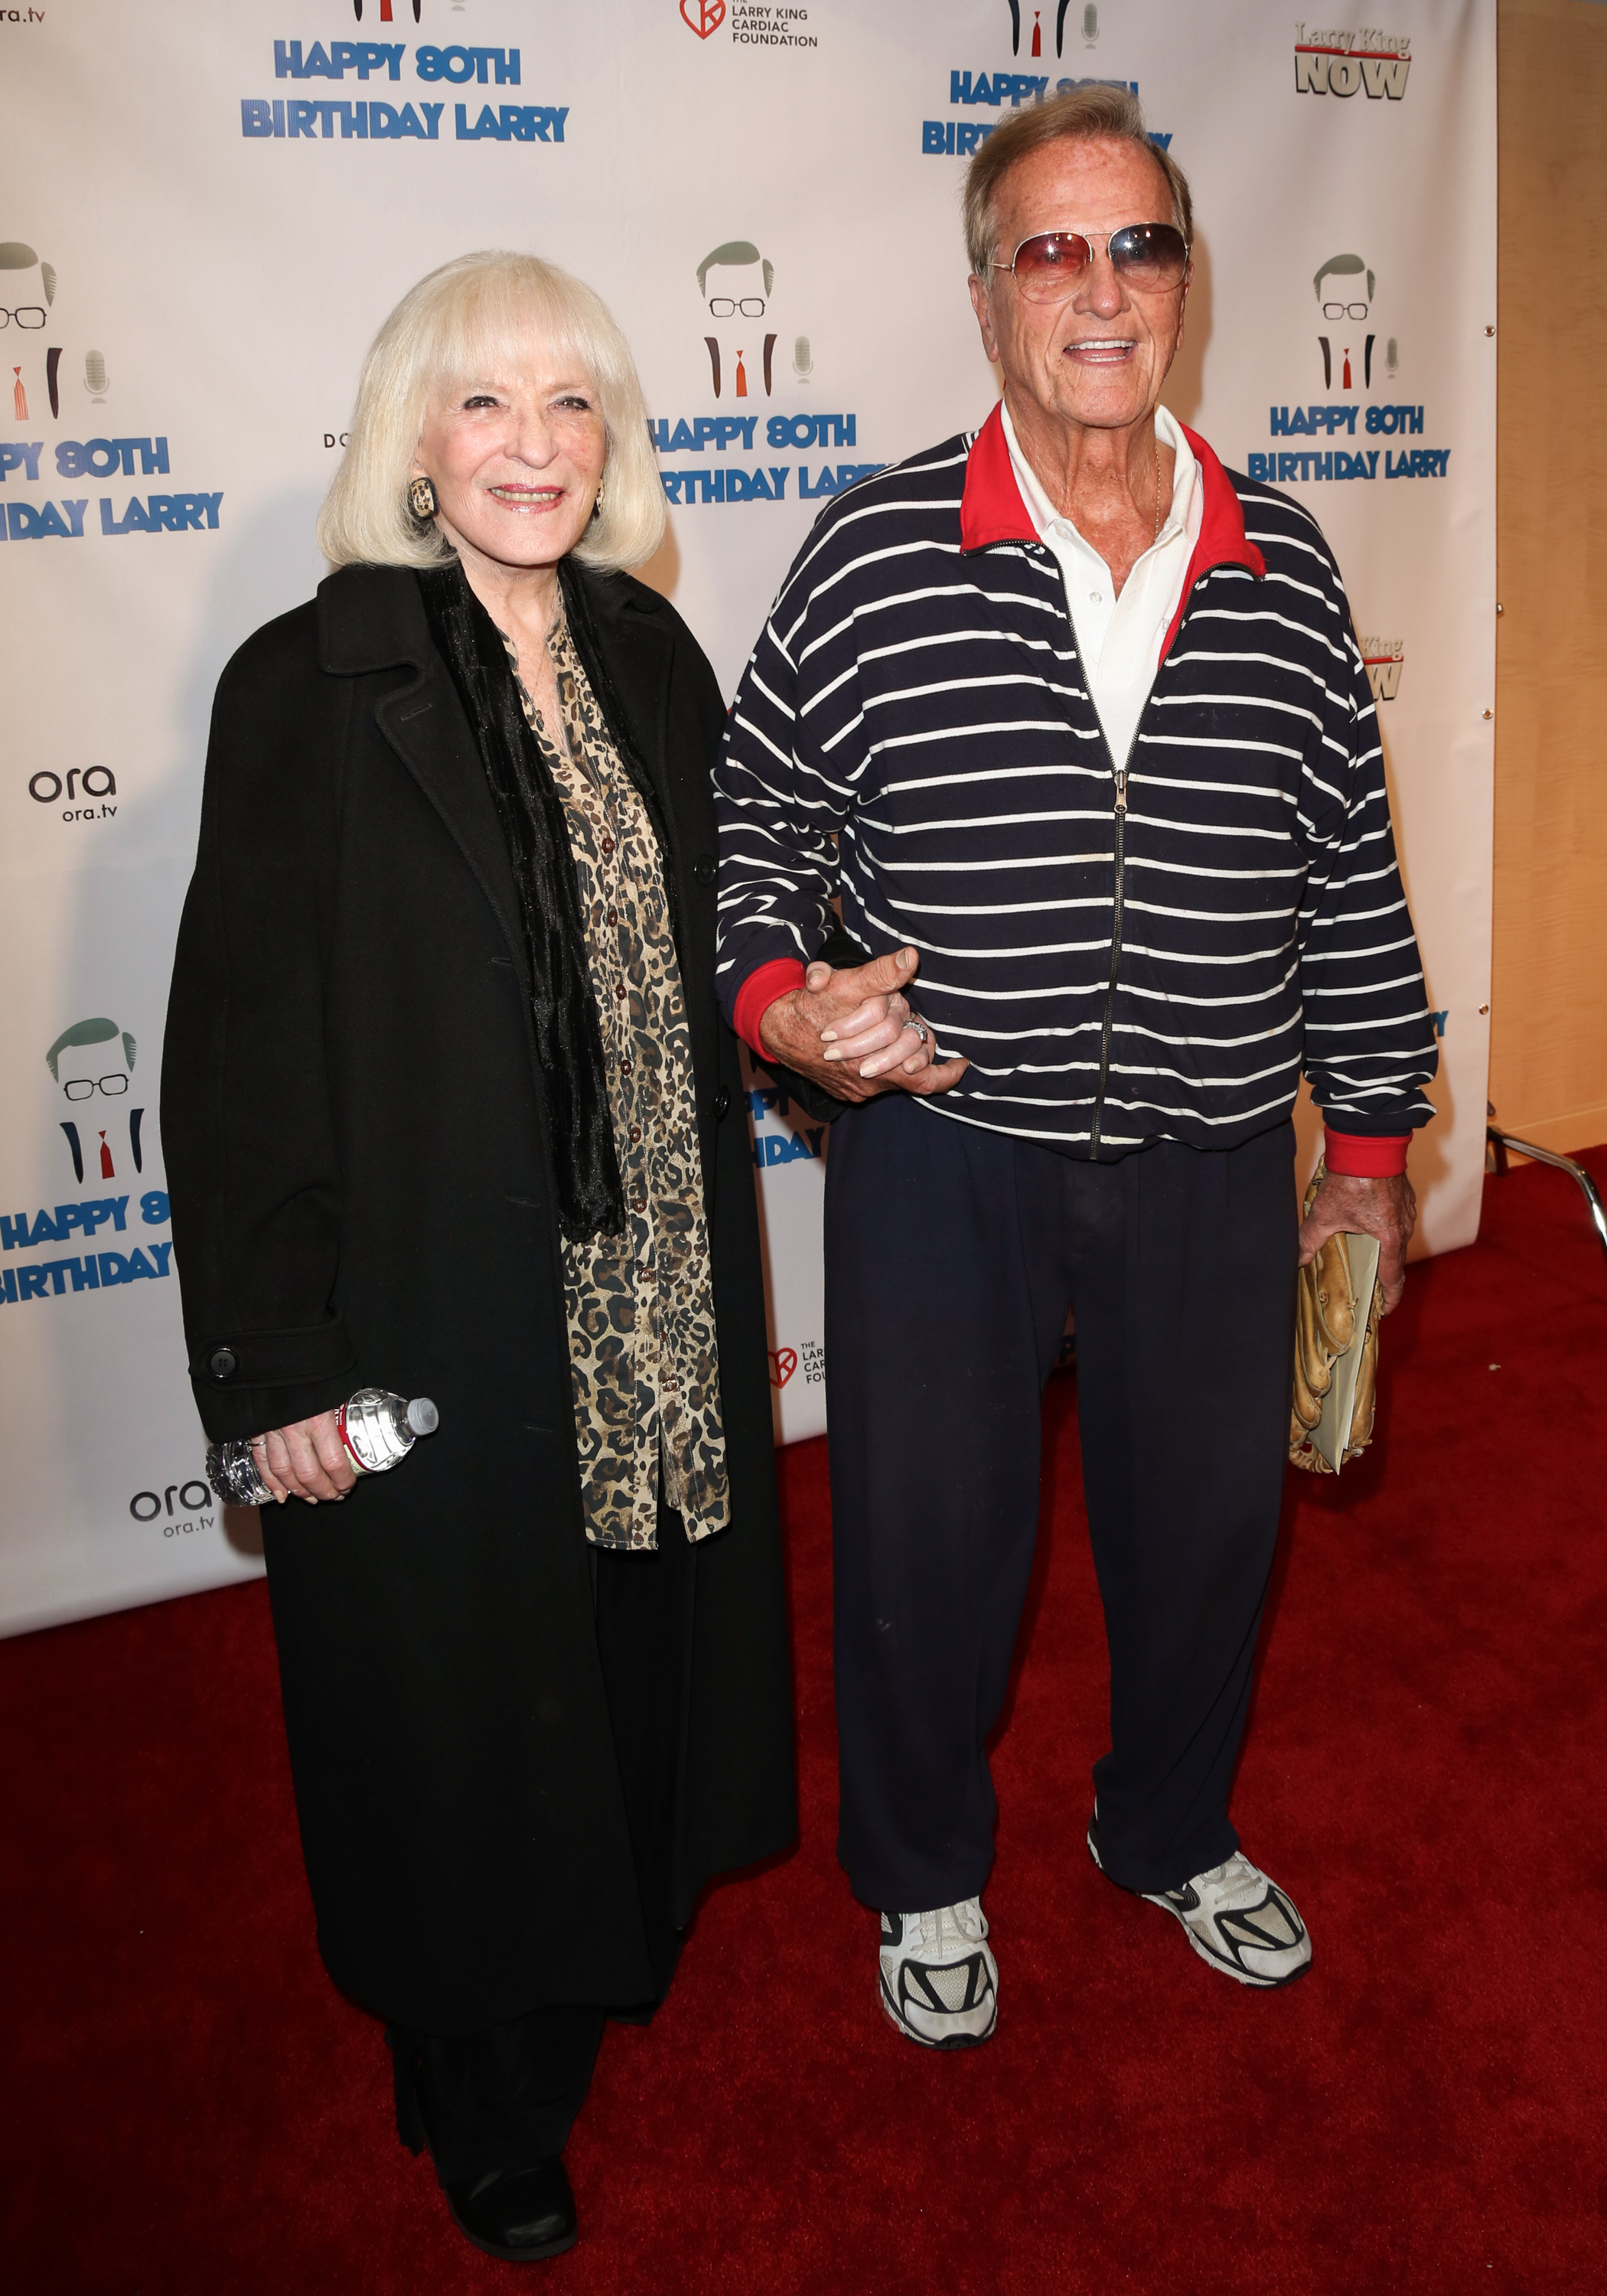 Pat and Shirley Boone at a surprise party for Larry King's 80th Birthday at Dodger Stadium in 2013 | Source: Getty Images